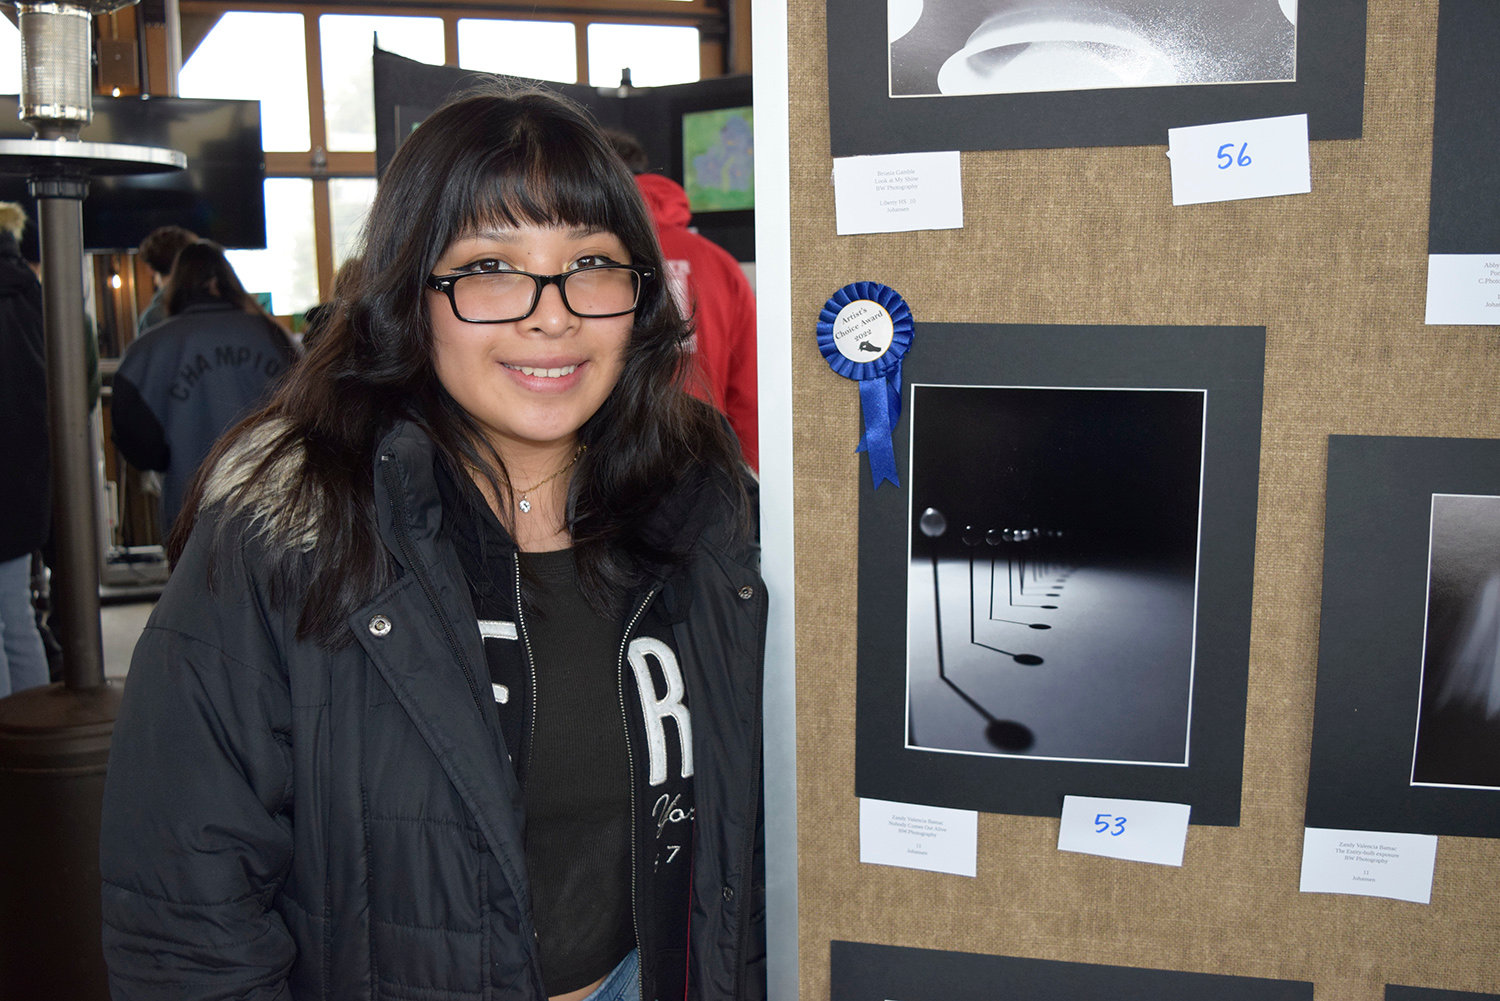 Zandy Valencia Bamac, from Liberty School District, won both the Student Choice Award and the Artist Choice Award for her black-and-white photography. ..